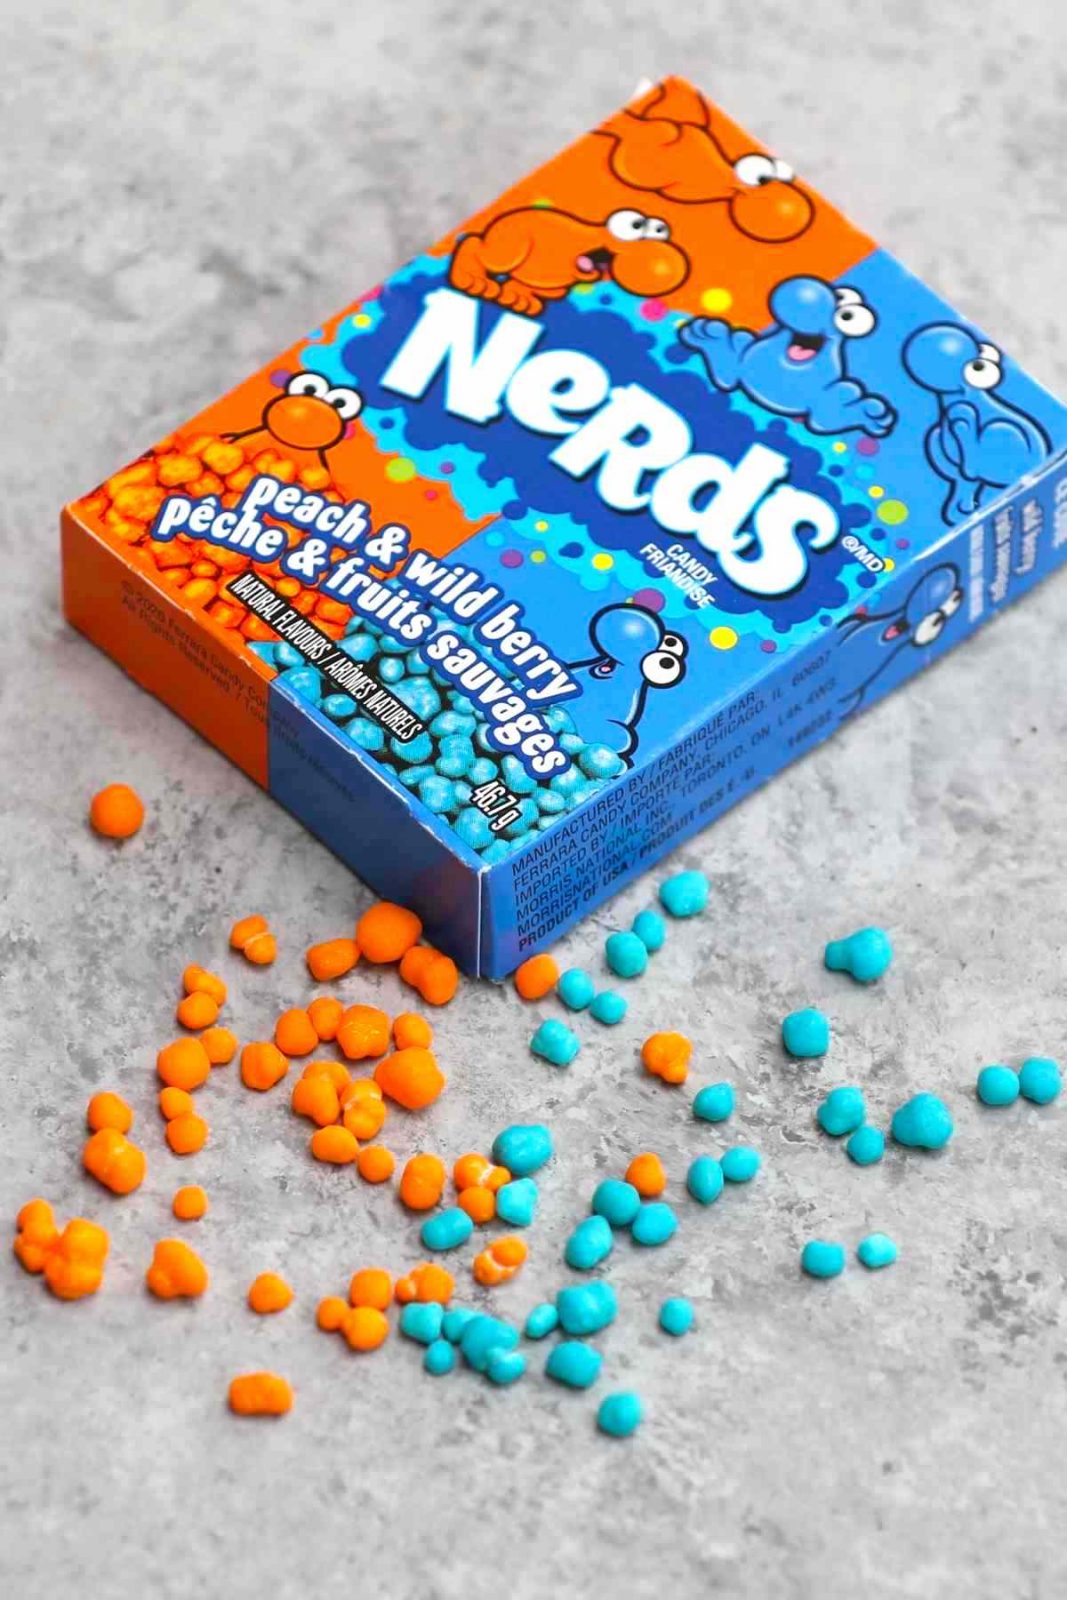 Nerds candy is a child’s dream and comes in neon colors with a small pebble shape. From extremely sour to extremely sweet, they’re fun to eat and full of flavor. If you’re following a vegan lifestyle and like to indulge in a package of Nerds from time to time, you may wonder, are Nerds vegan? Can vegan eat Nerds?